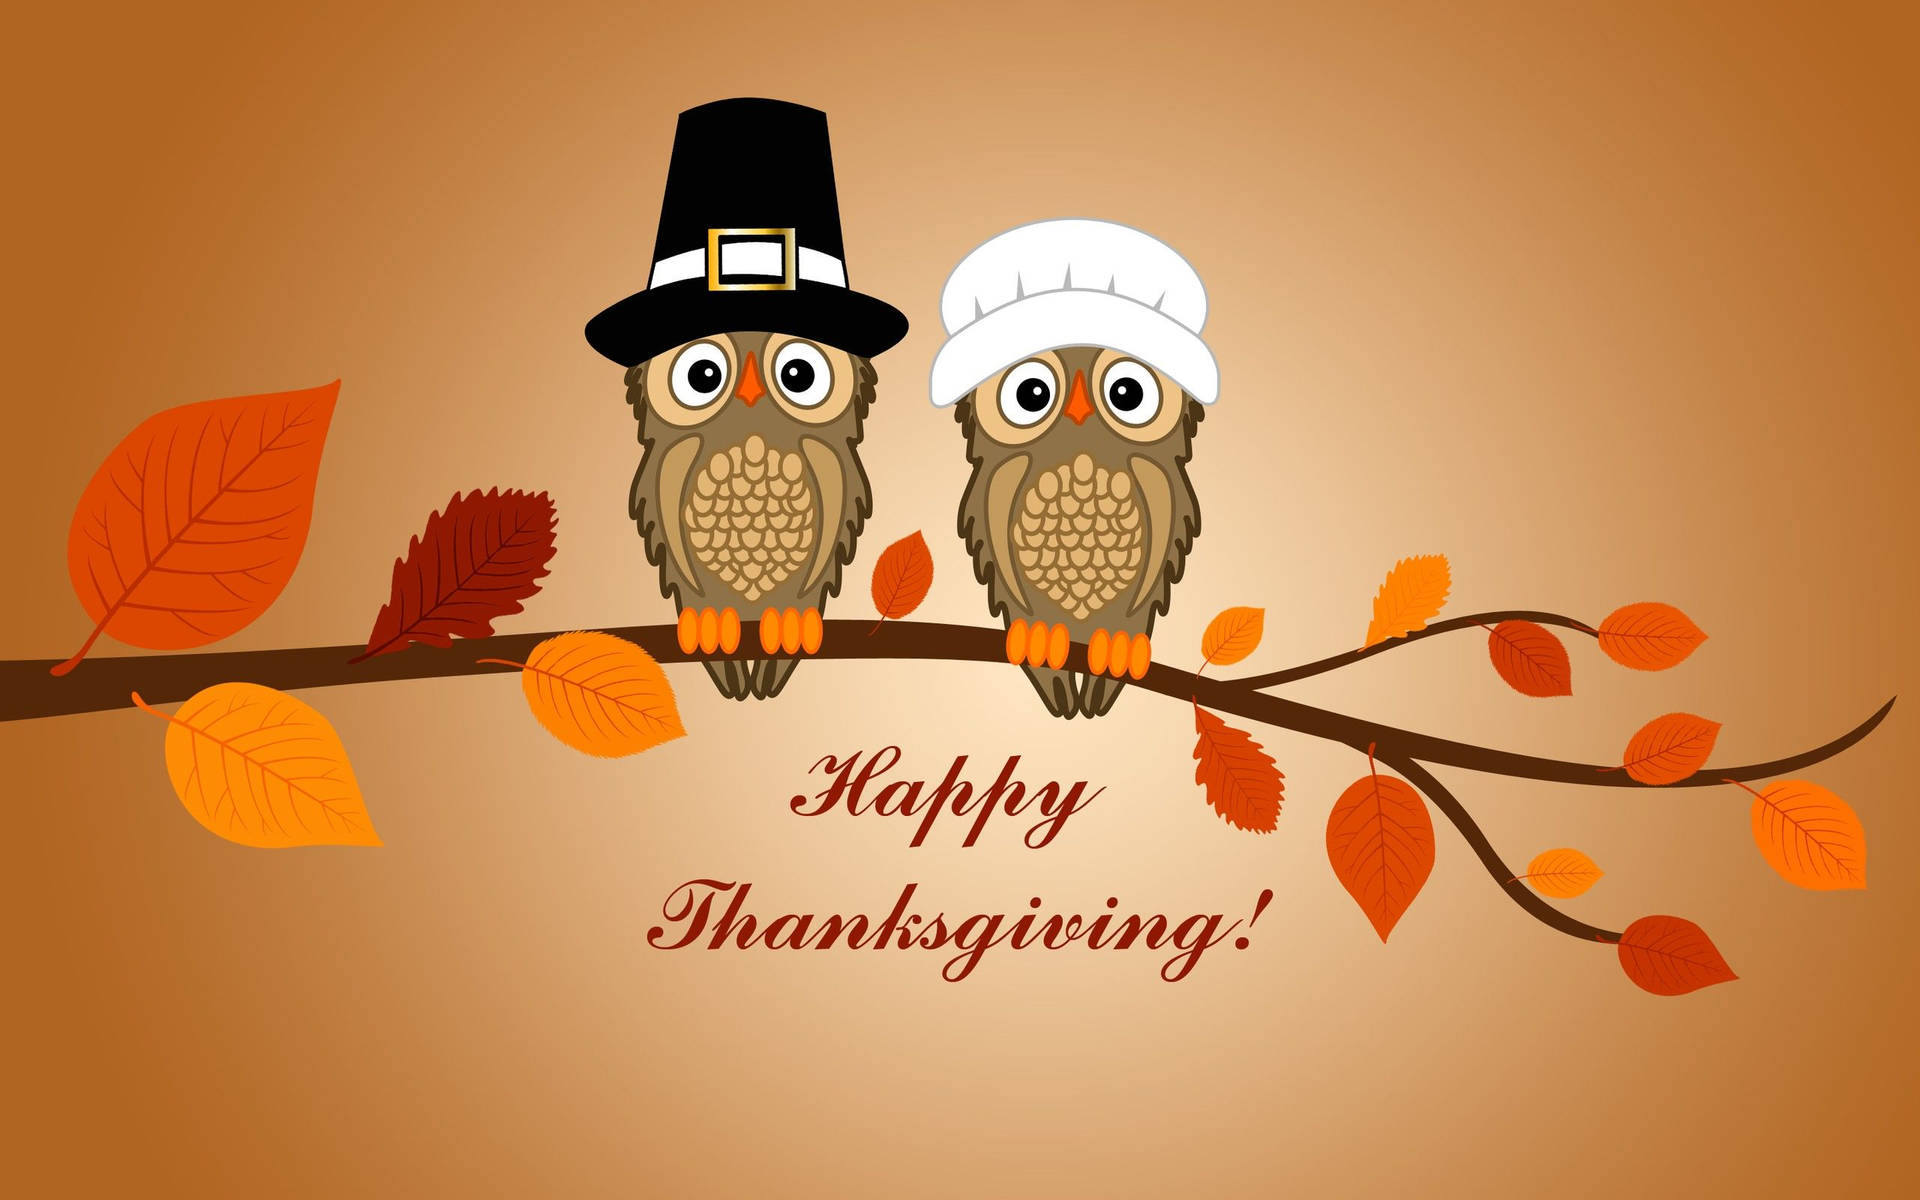 Celebrate Thanksgiving with your loved ones! Wallpaper